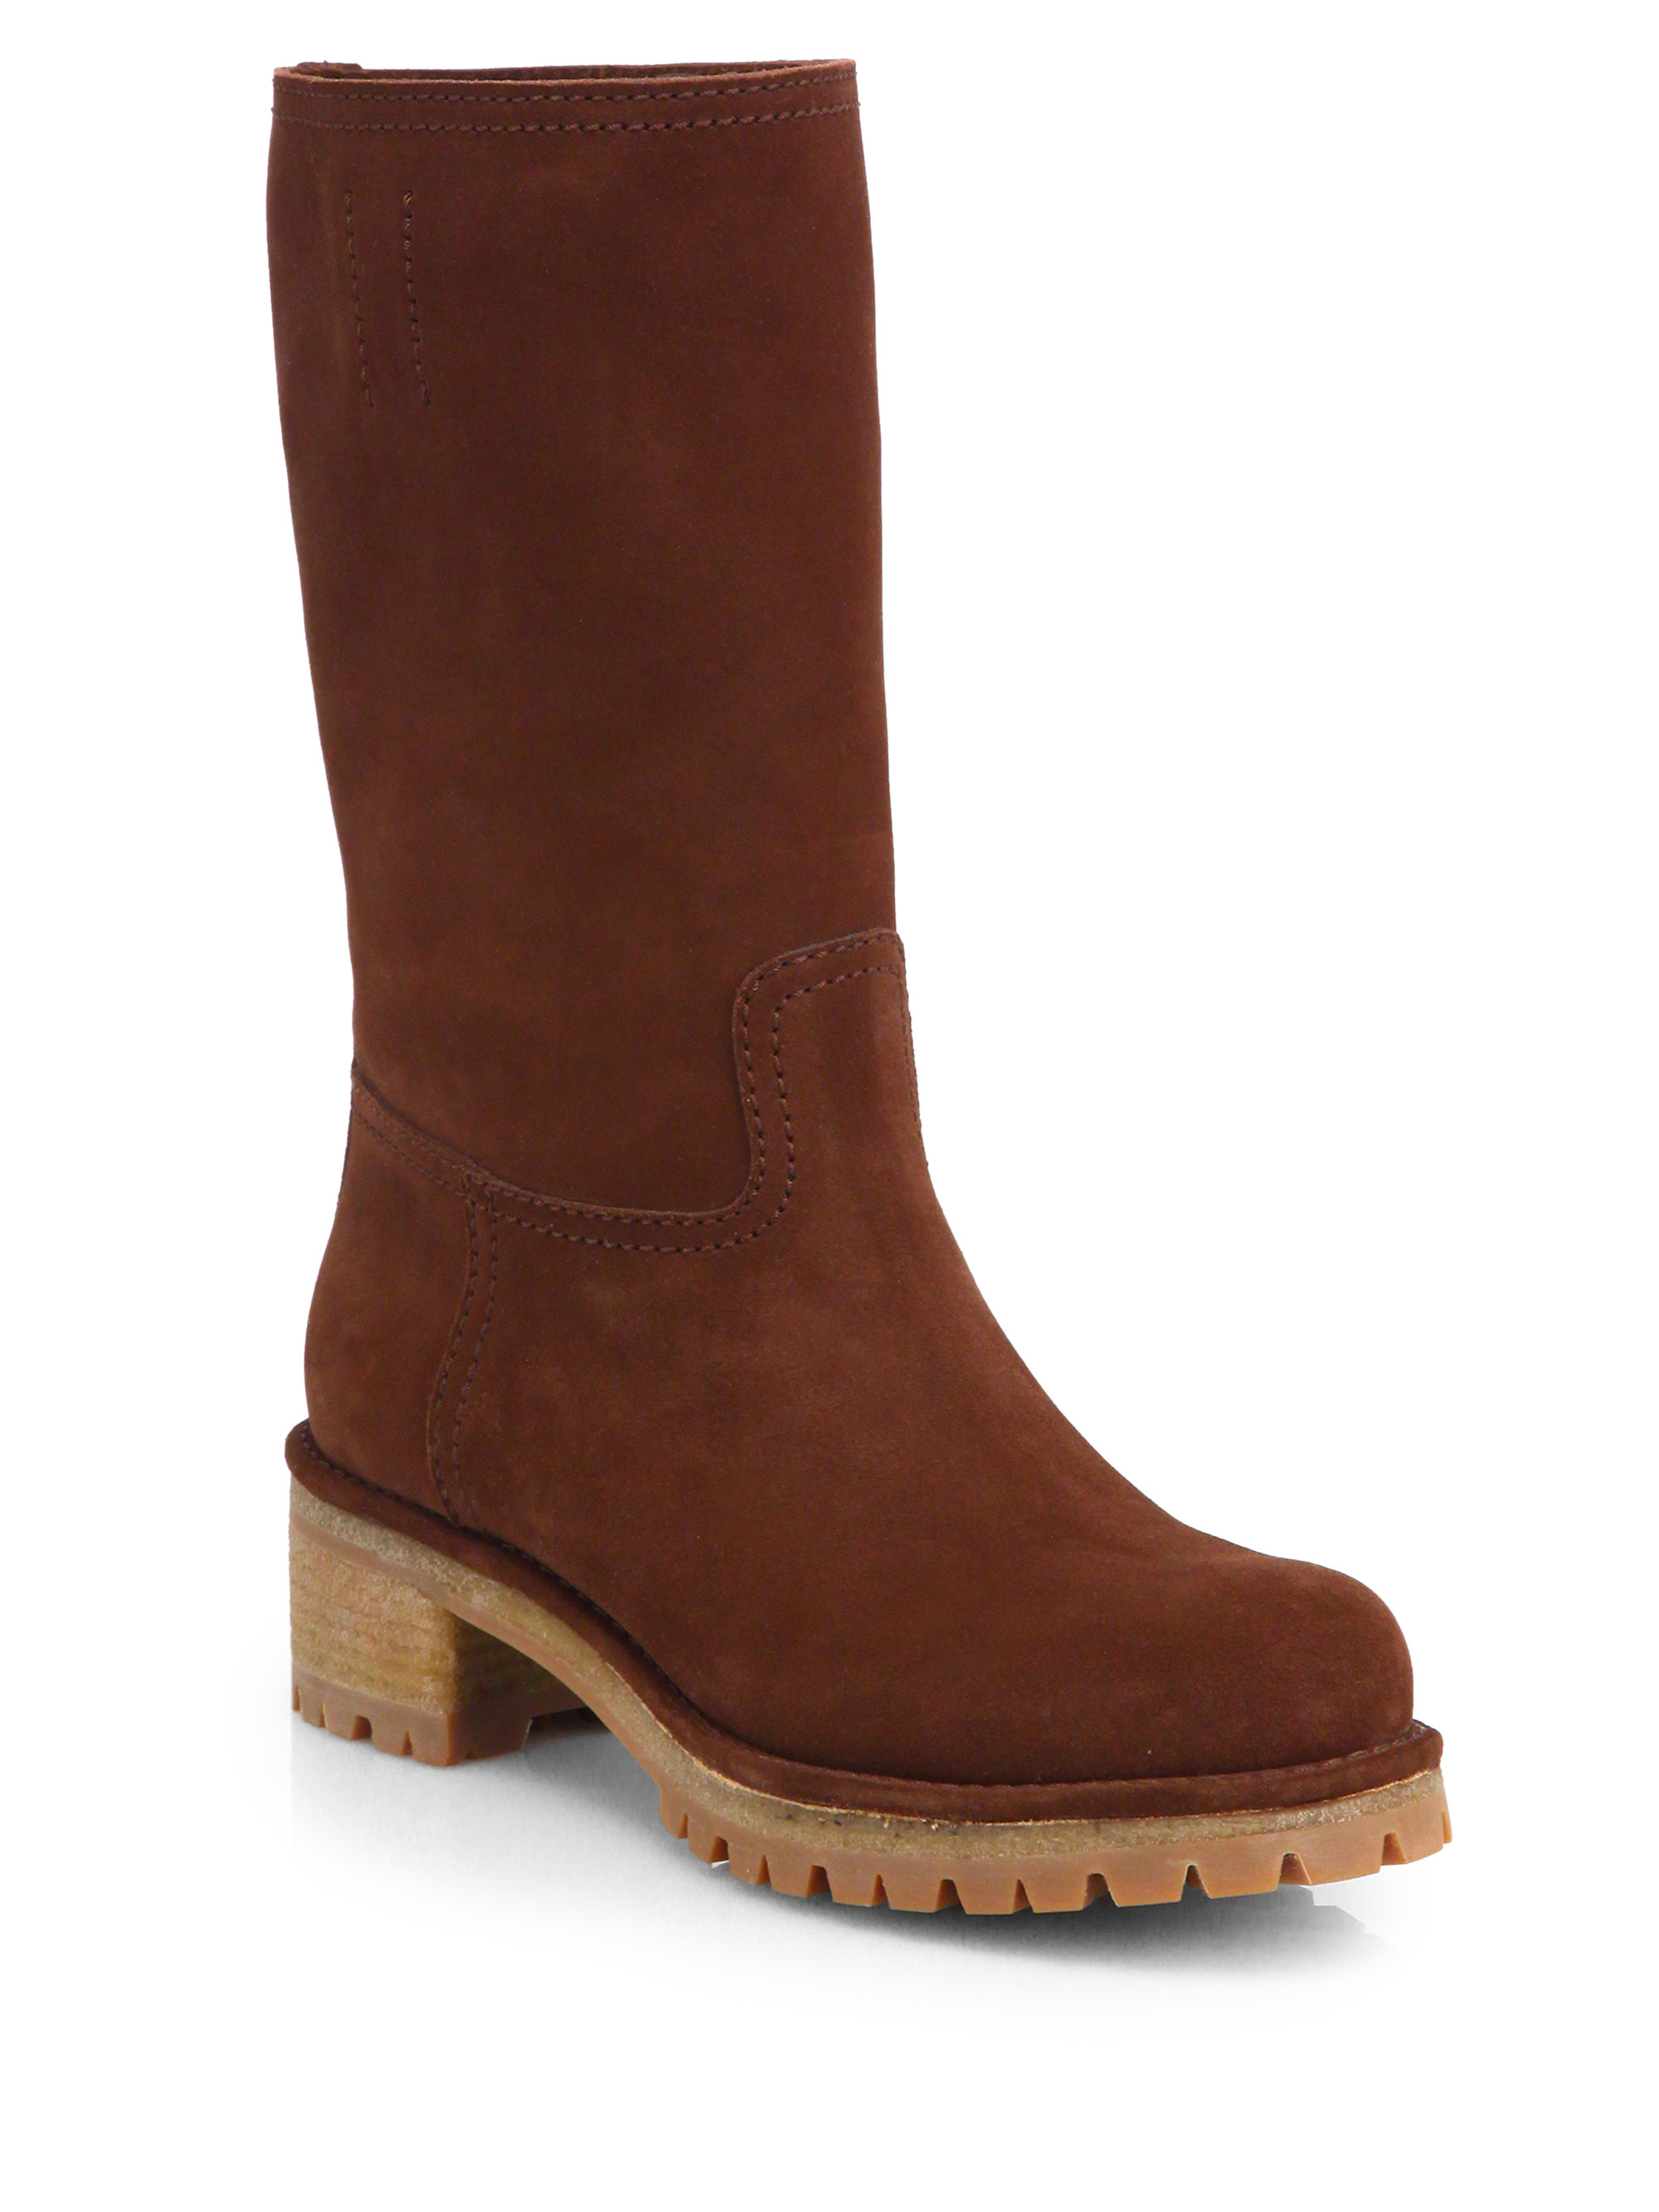 Buy > brown suede mid calf boots > in stock